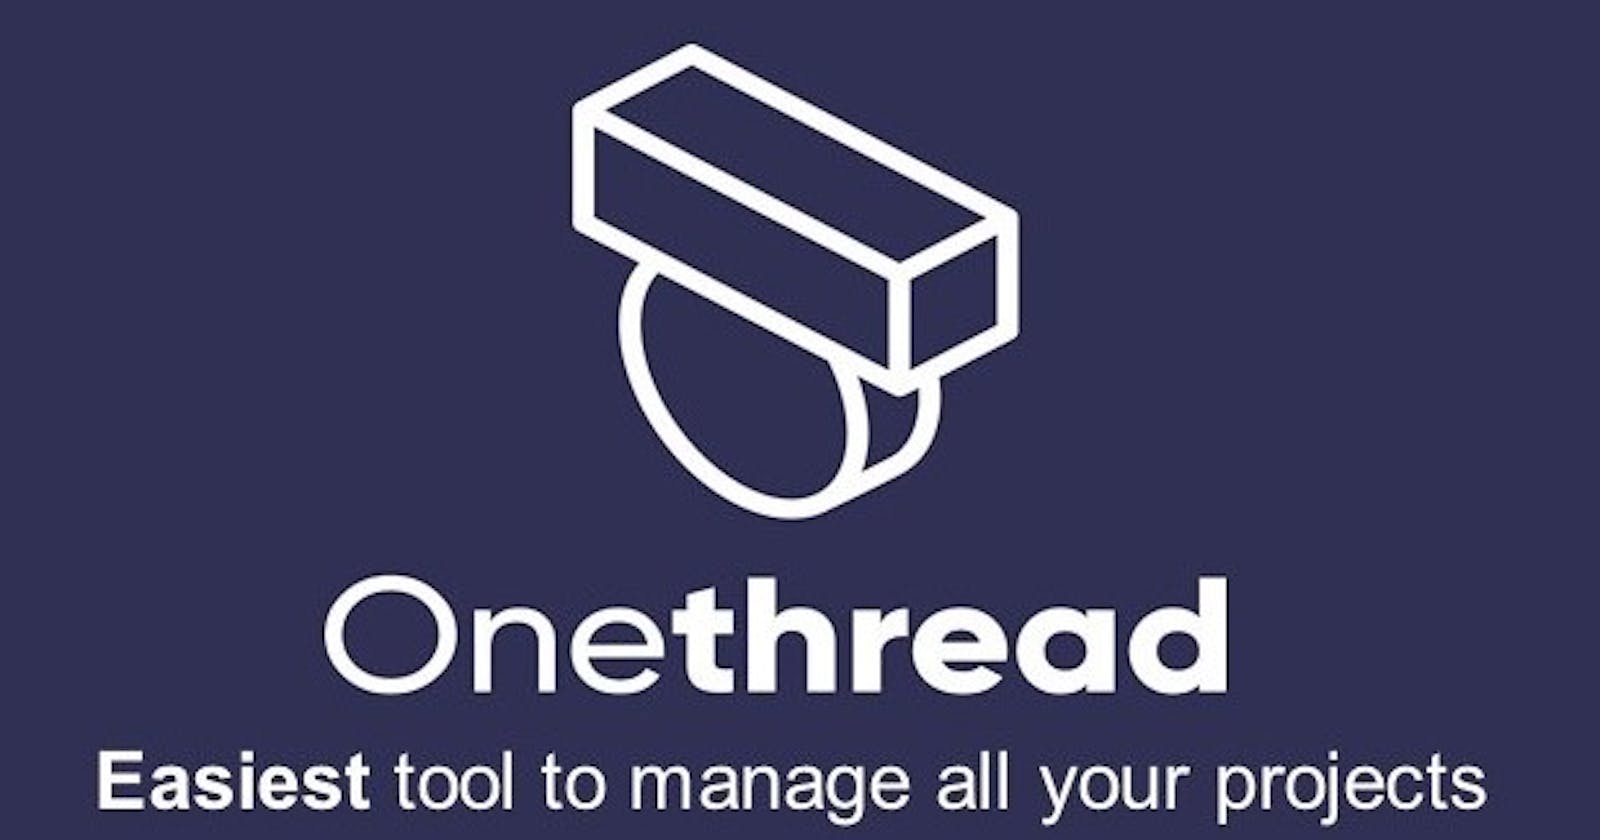 What is Onethread used for? Our favorite project management software explained.